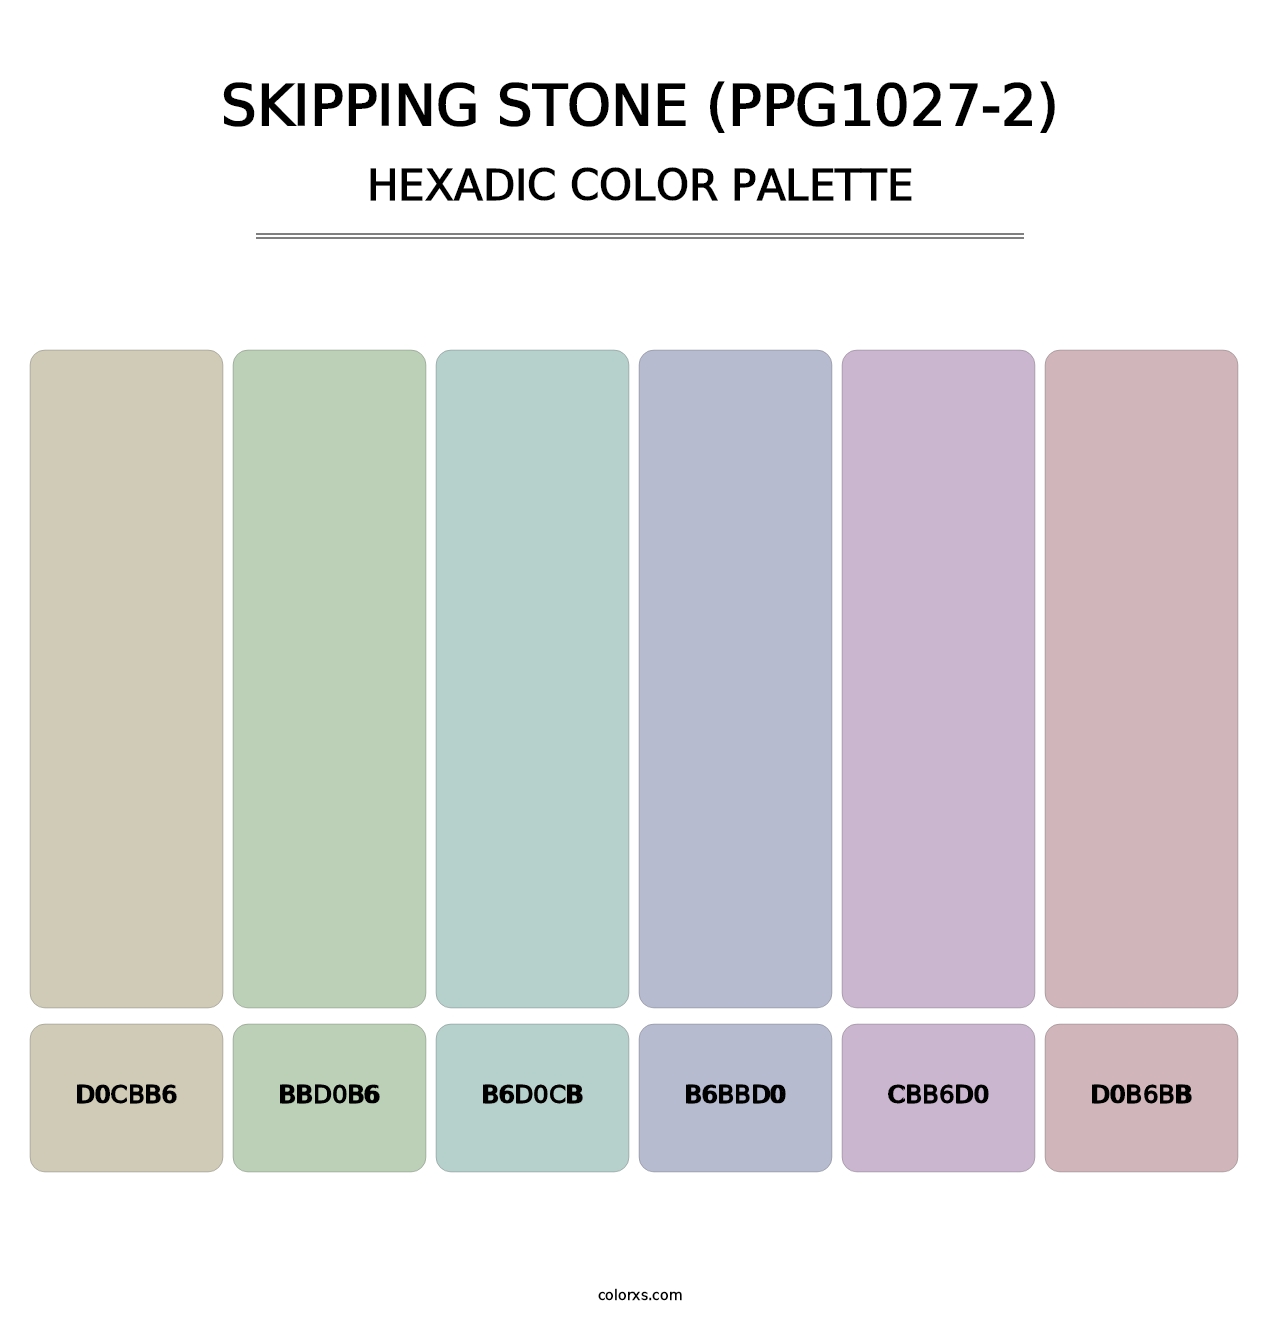 Skipping Stone (PPG1027-2) - Hexadic Color Palette